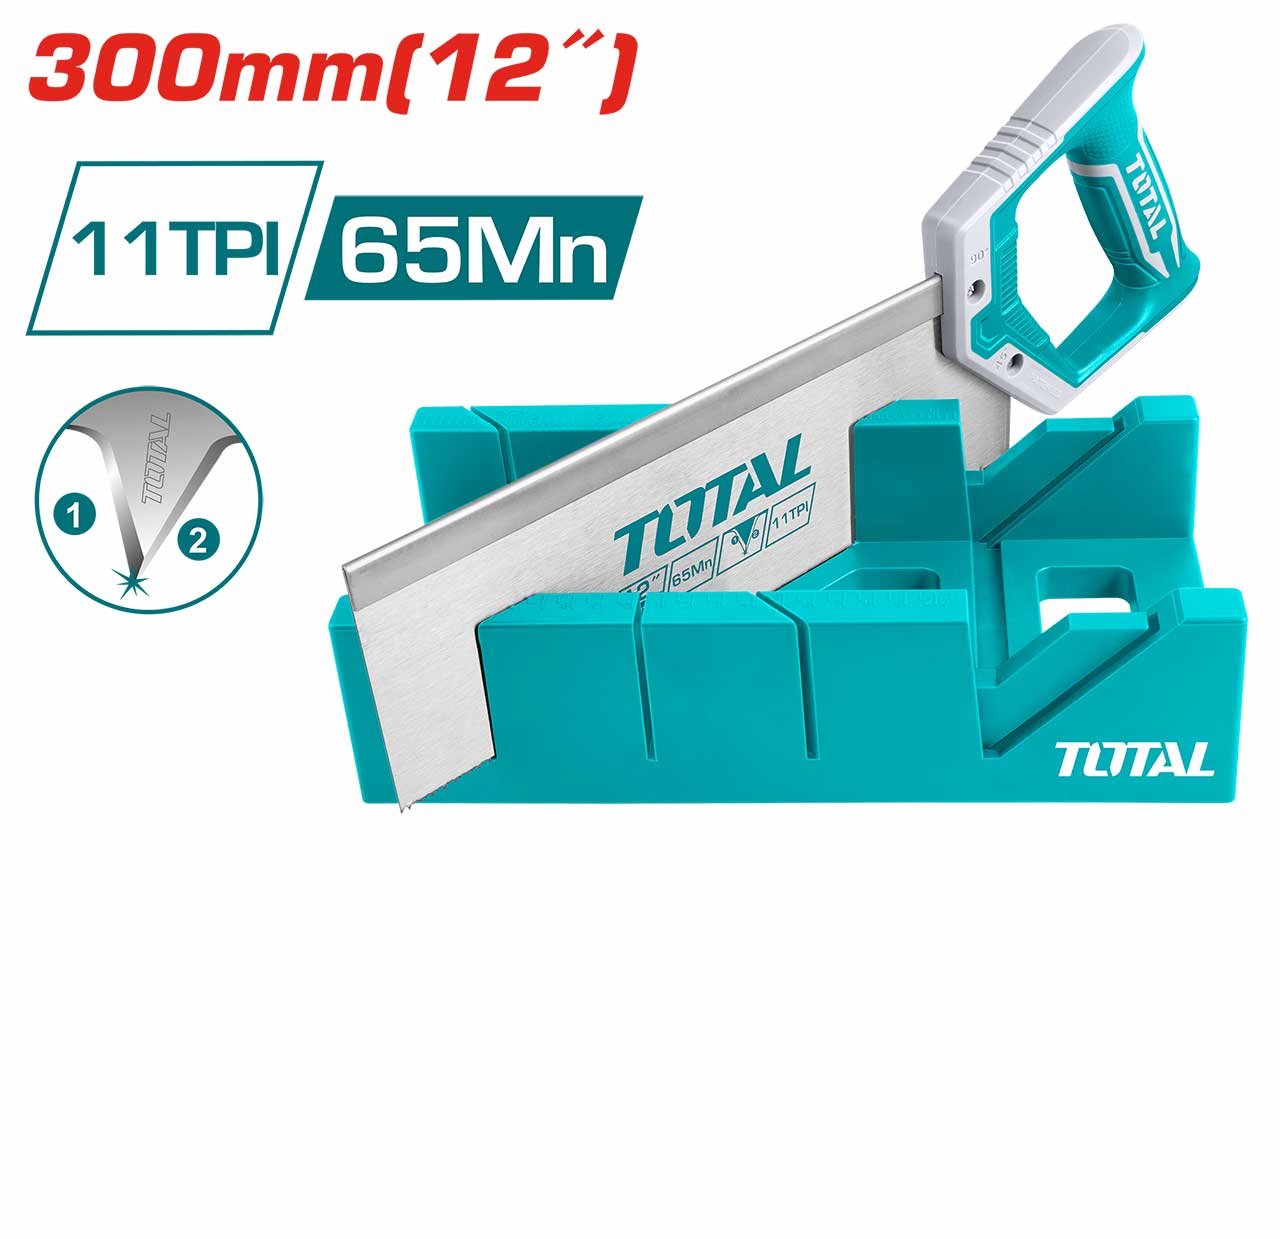 Total Mitre Box and Back Saw Set Price in Pakistan